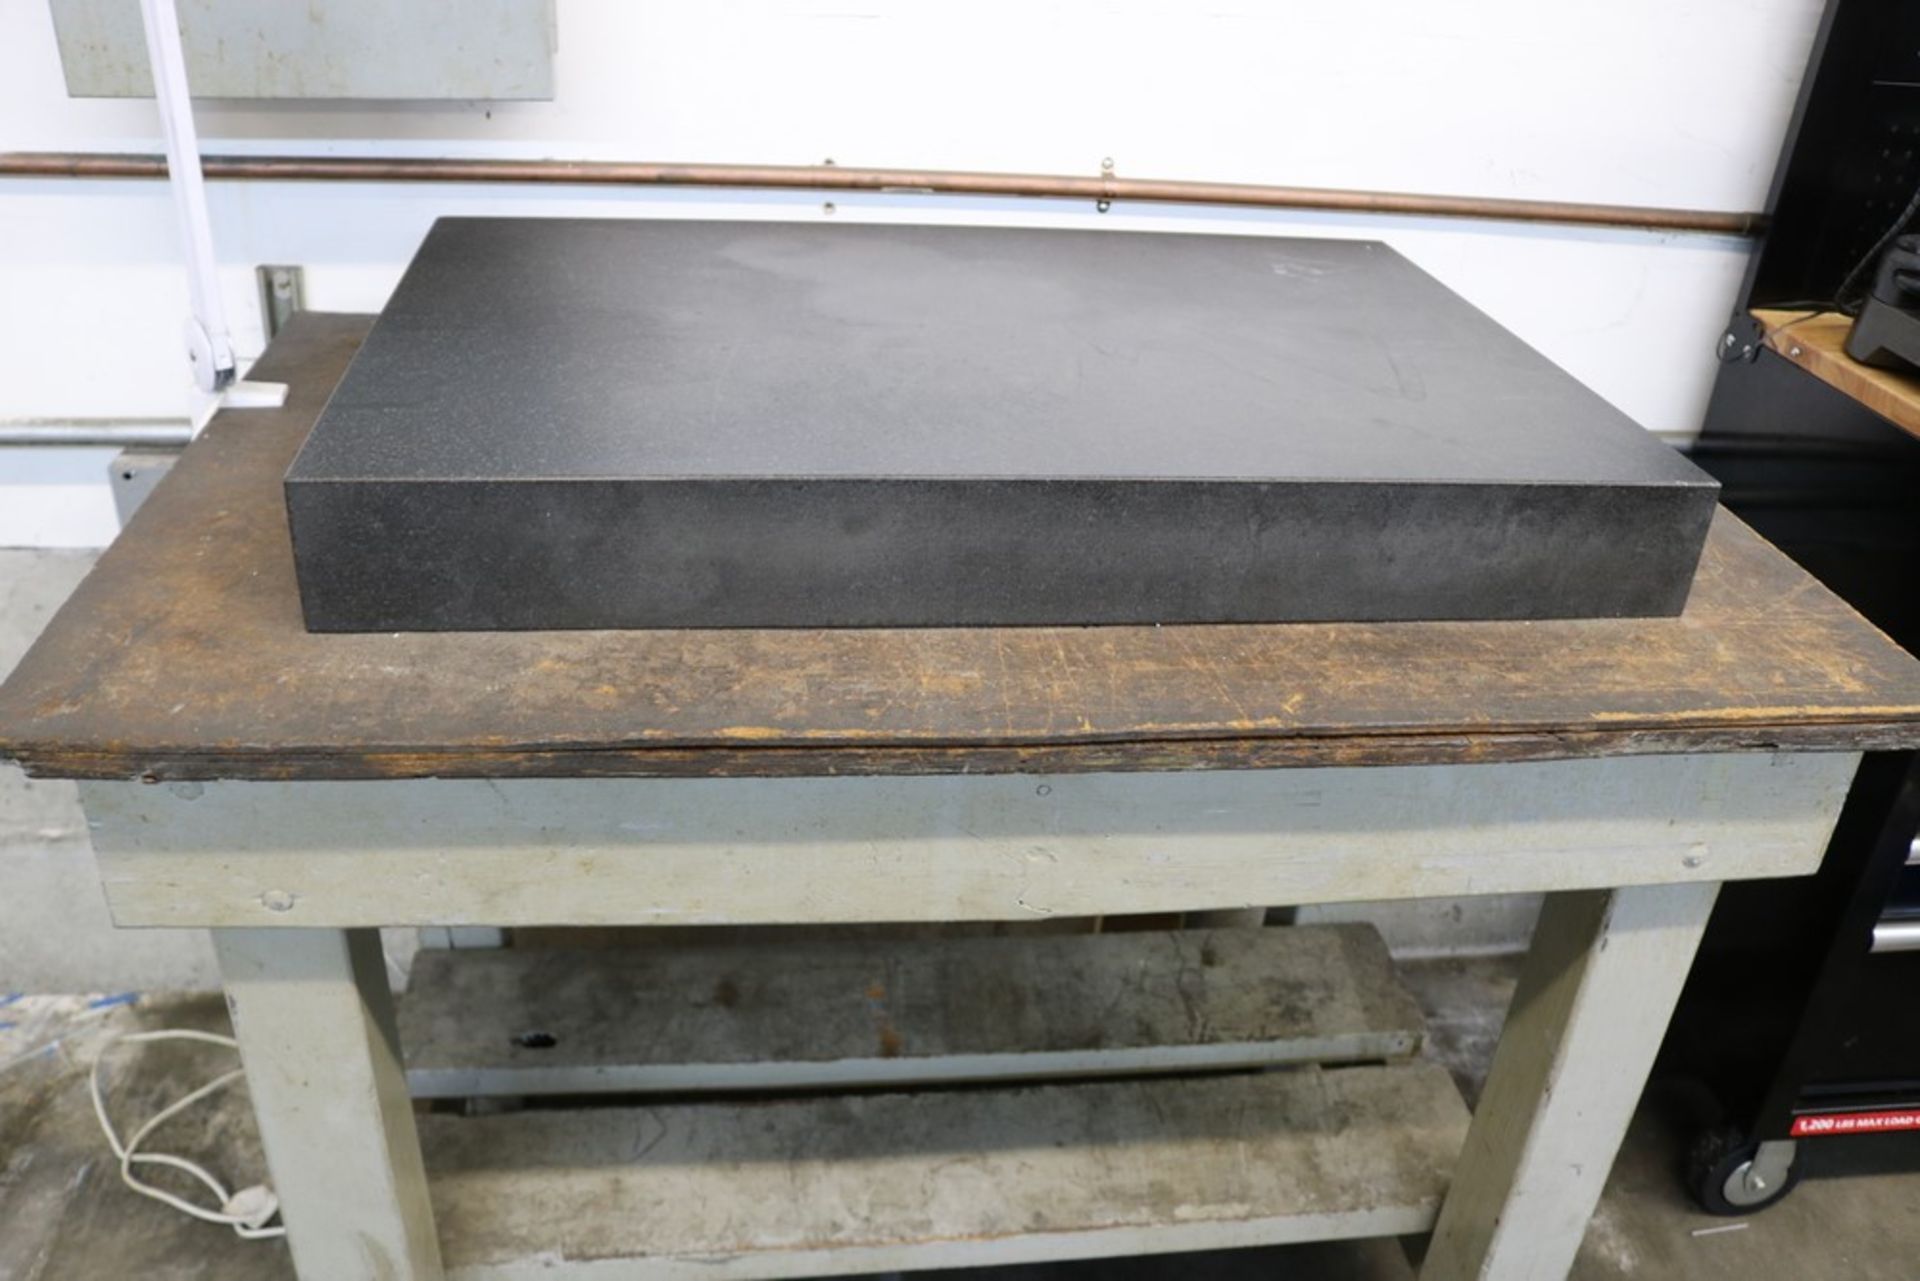 Black Granite Surface Plate and Wood Shop Table 24" x 36" x 4" - Image 4 of 5